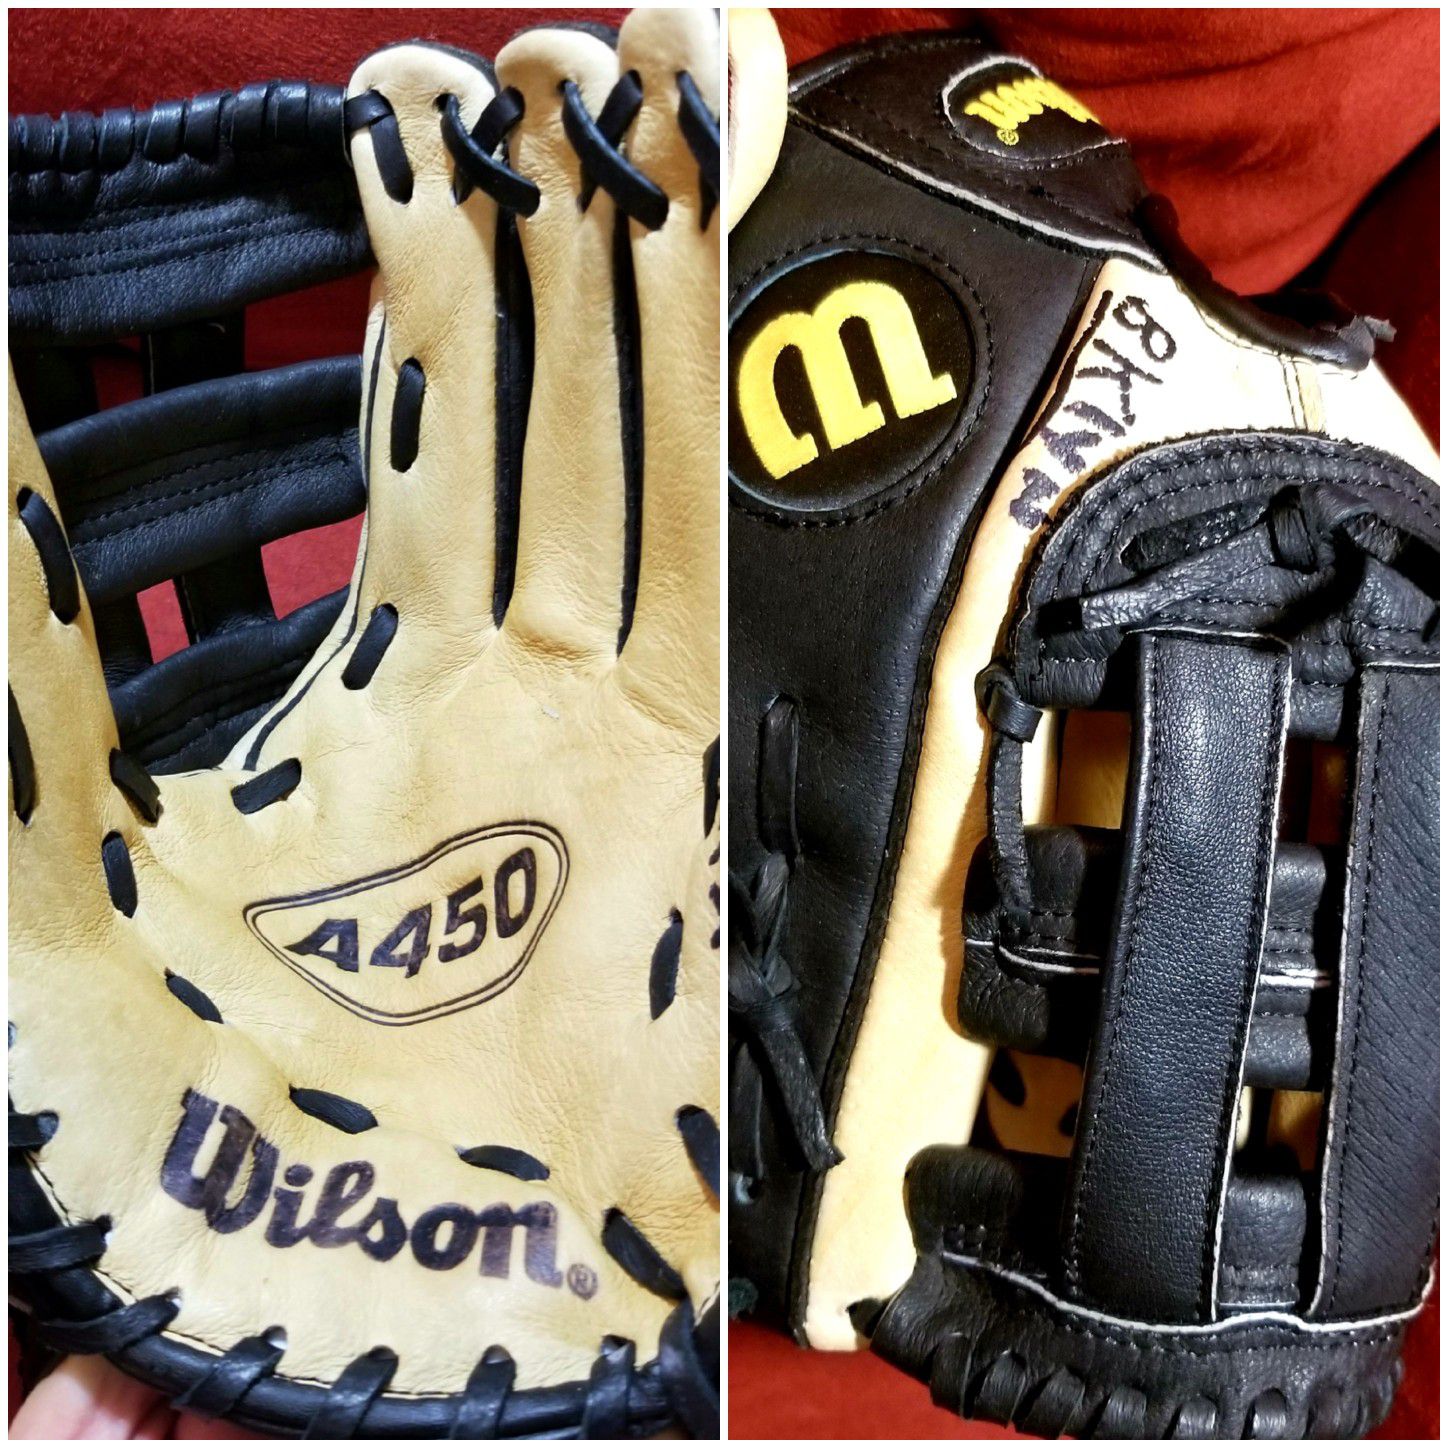 11" Wilson A450 baseball glove for right handed thrower